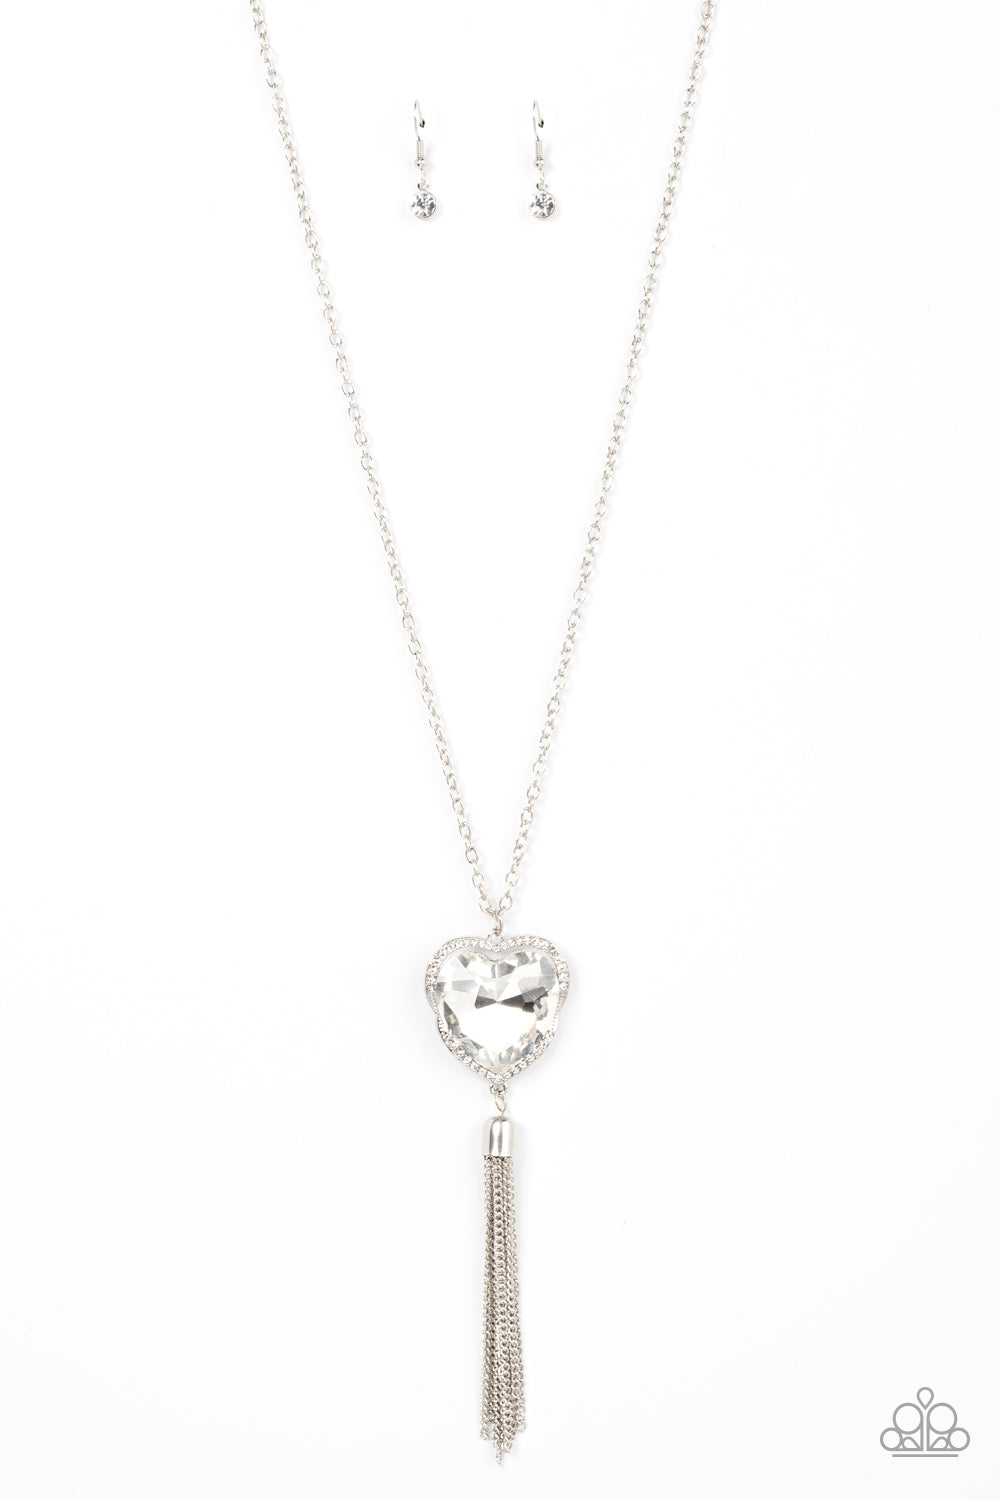 Finding My Forever - White Gem Necklace